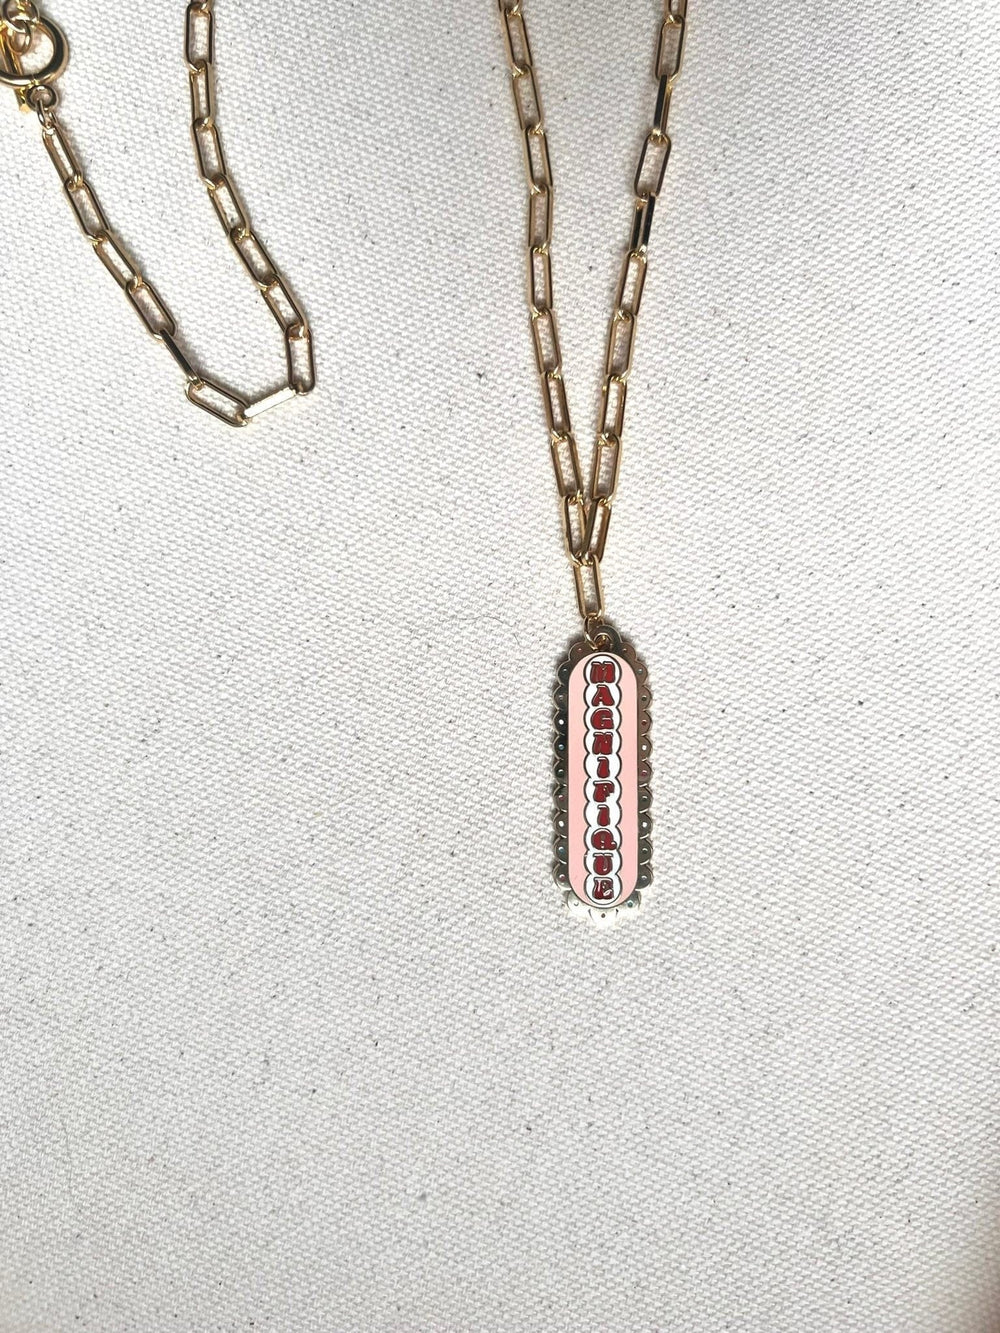 Magnifique Necklace with a medium paperclip chain and a scalloped pendant featuring a red and white design on a textured fabric surface by Necklaces.